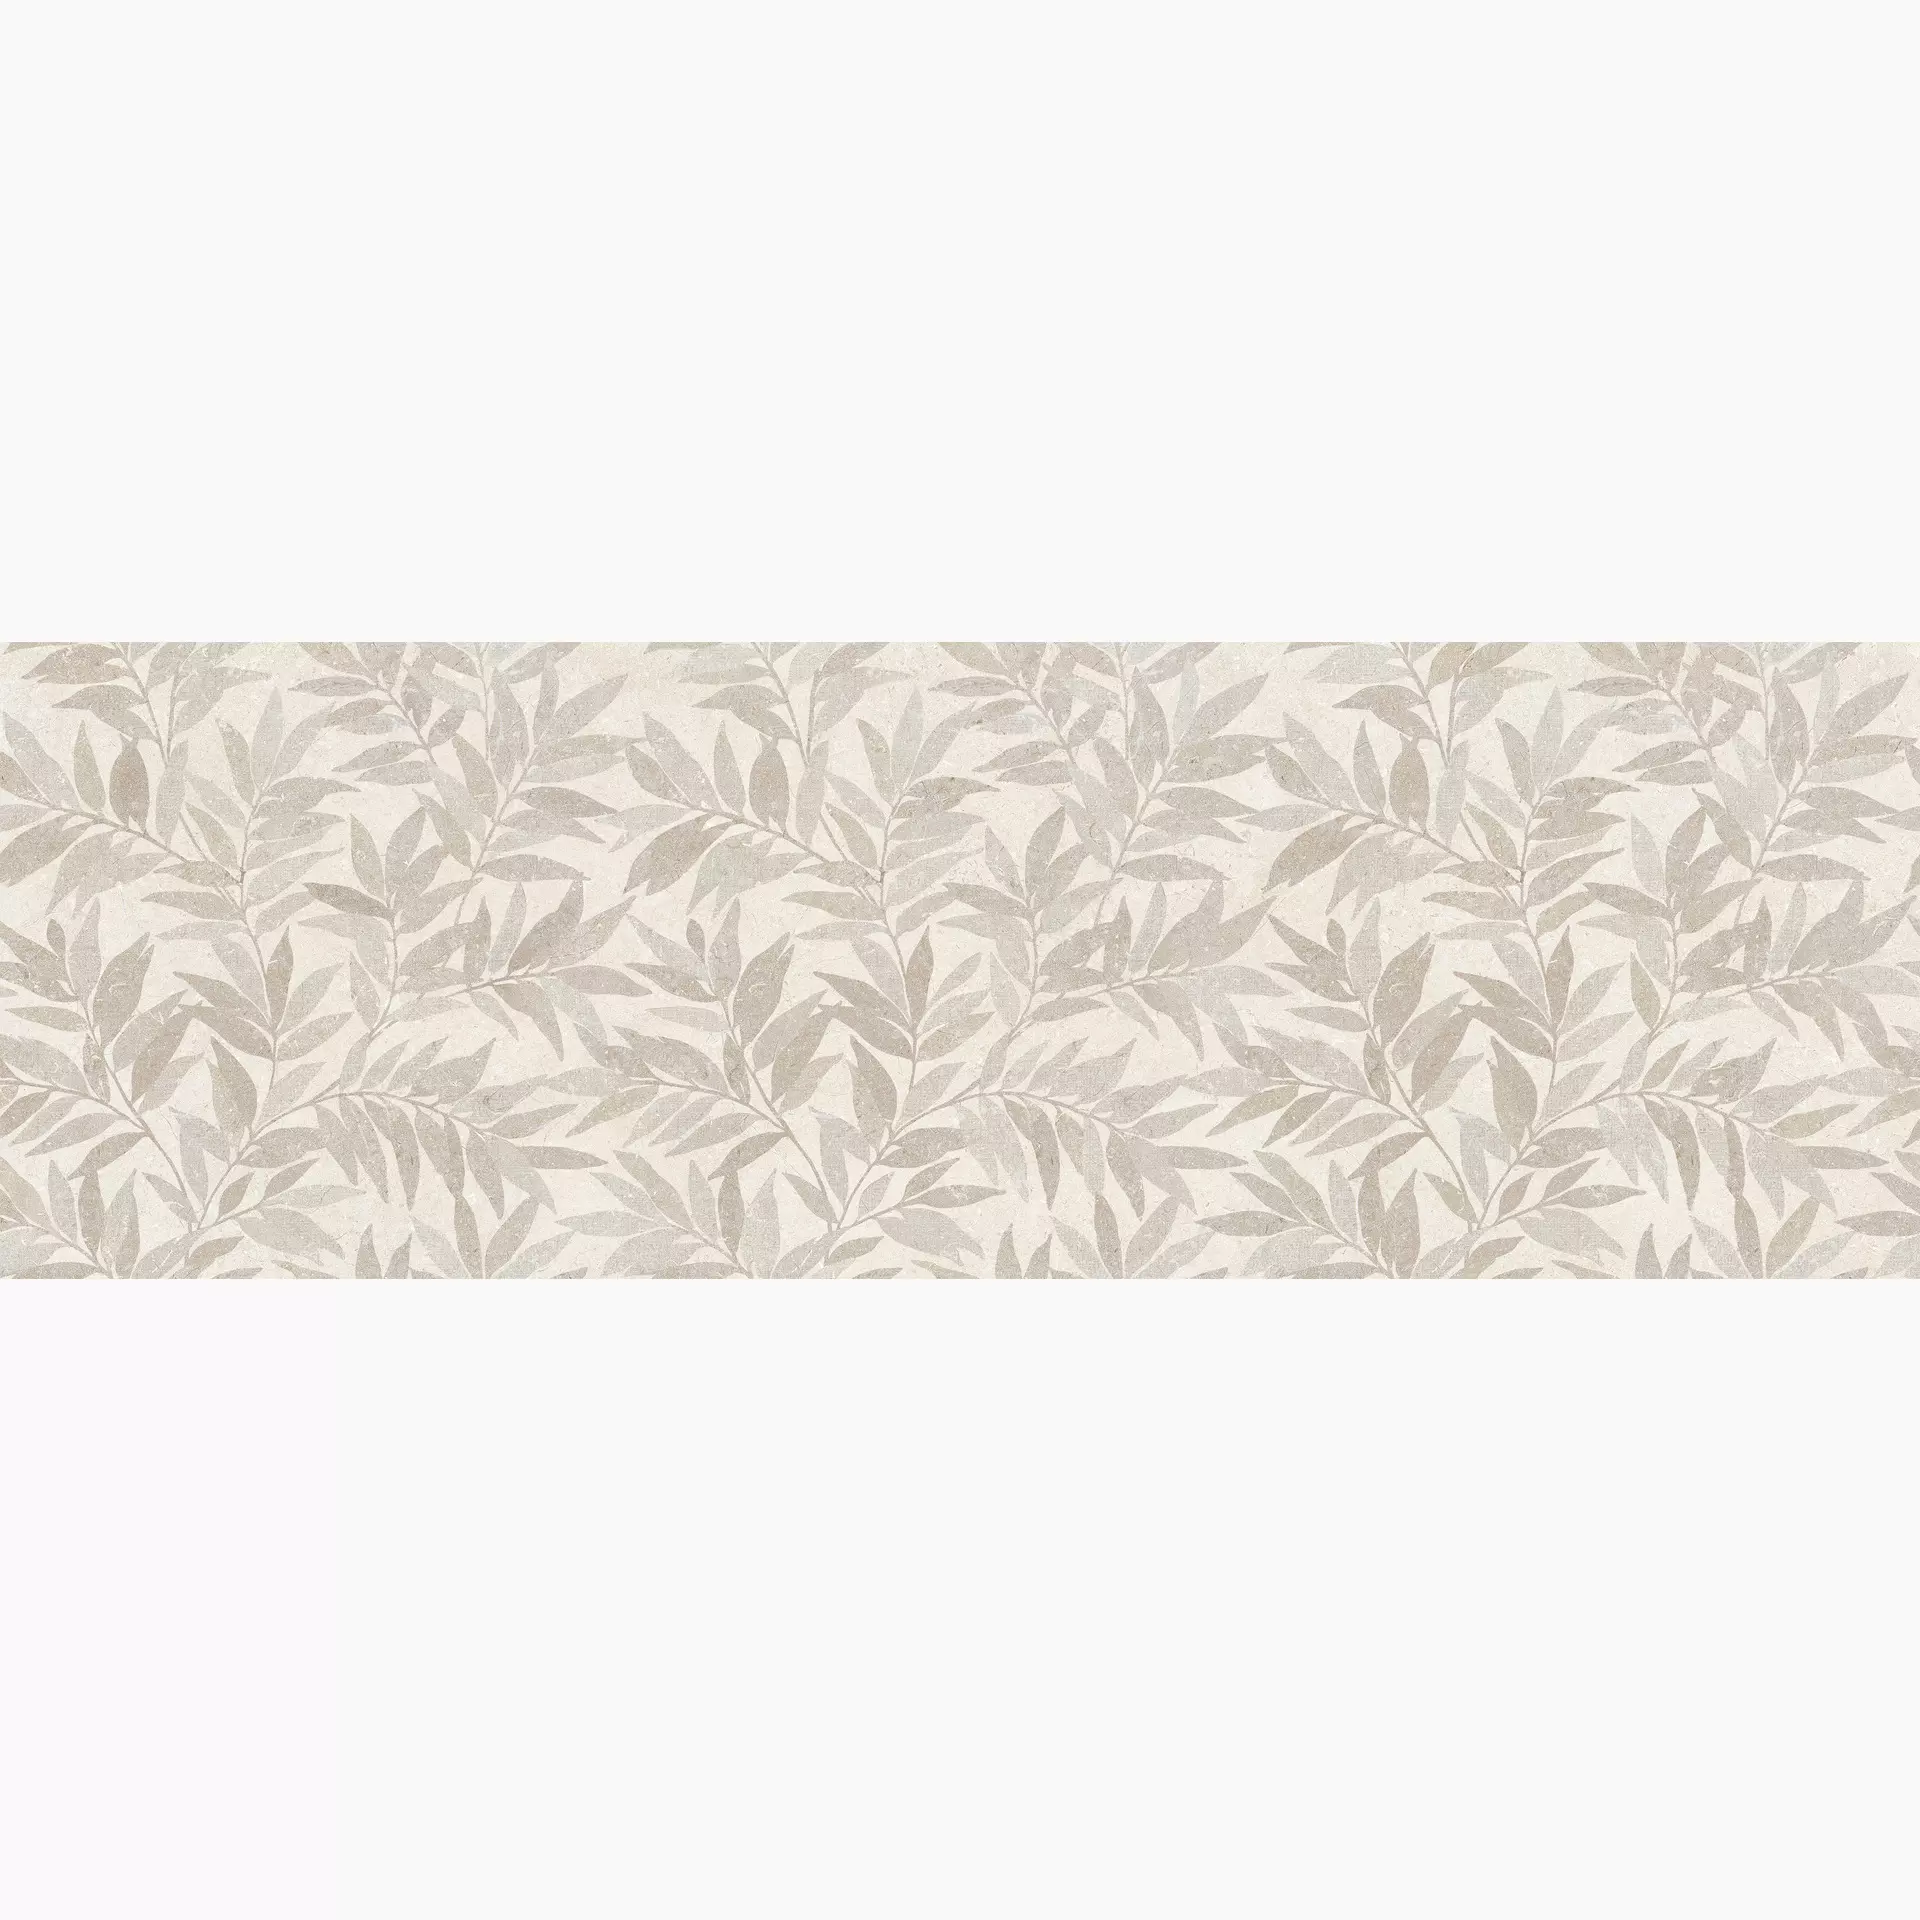 Wandfliese Marazzi Limestone Wall Ivory – Taupe Touch Ivory – Taupe MFCP touch 40x120cm Dekor Agrifolgio rektifiziert 6mm